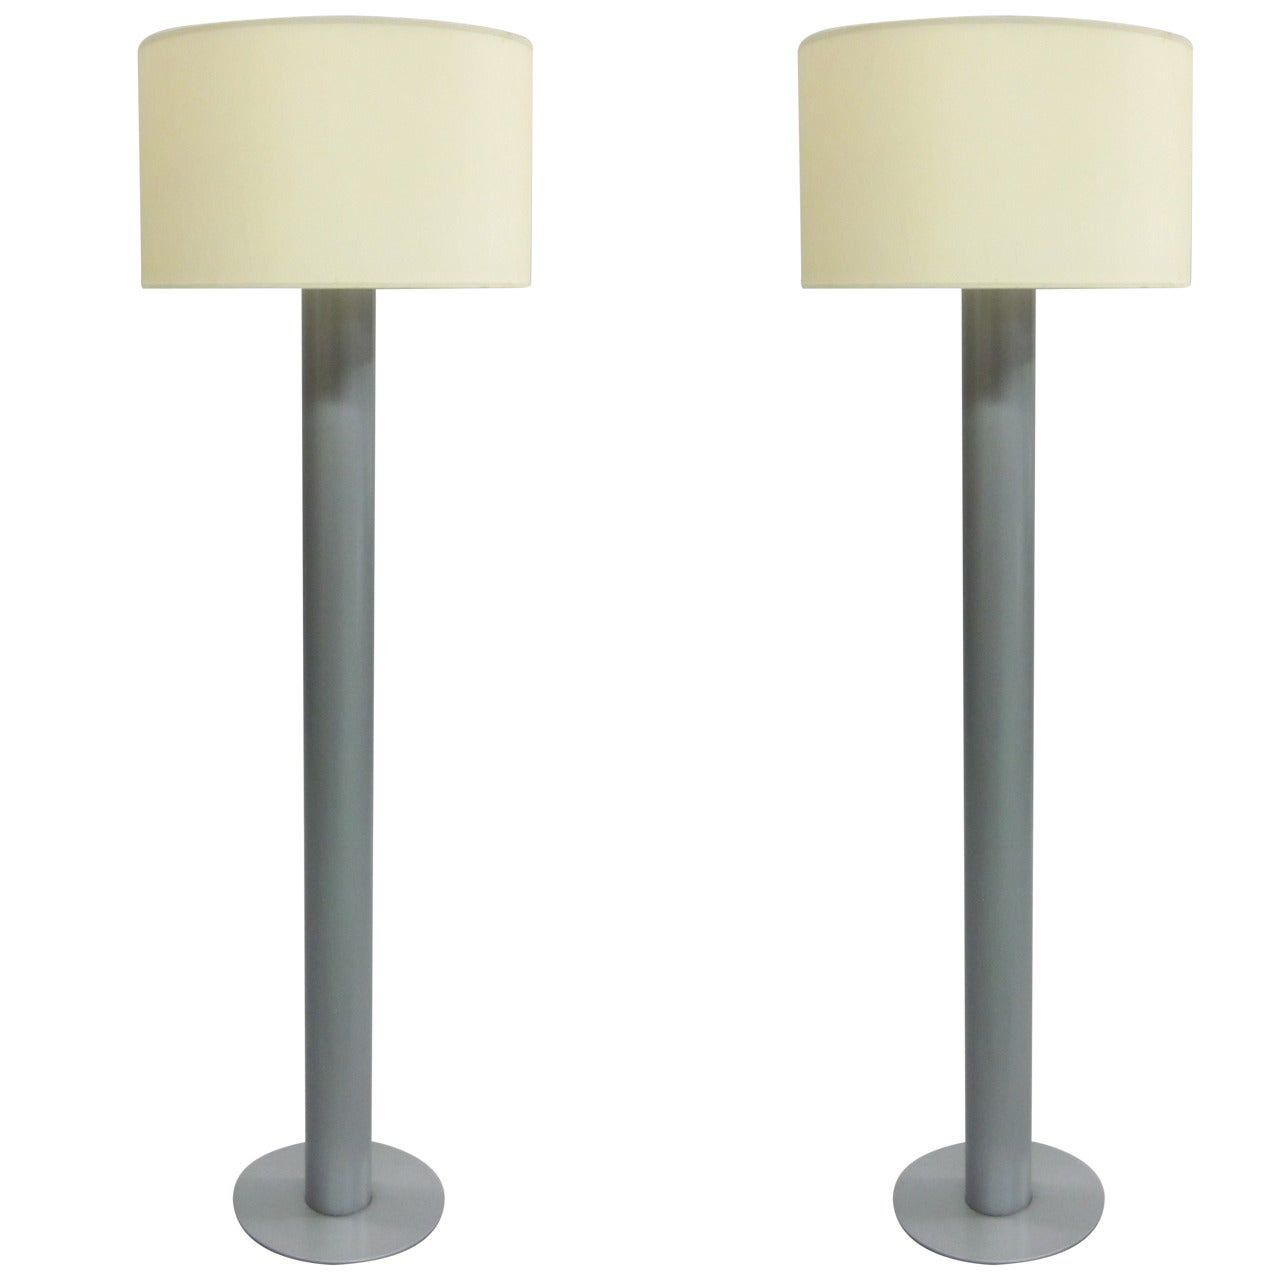 Pair of French Mid-Century Modern Enameled Steel Floor Lamps, 1970 For Sale